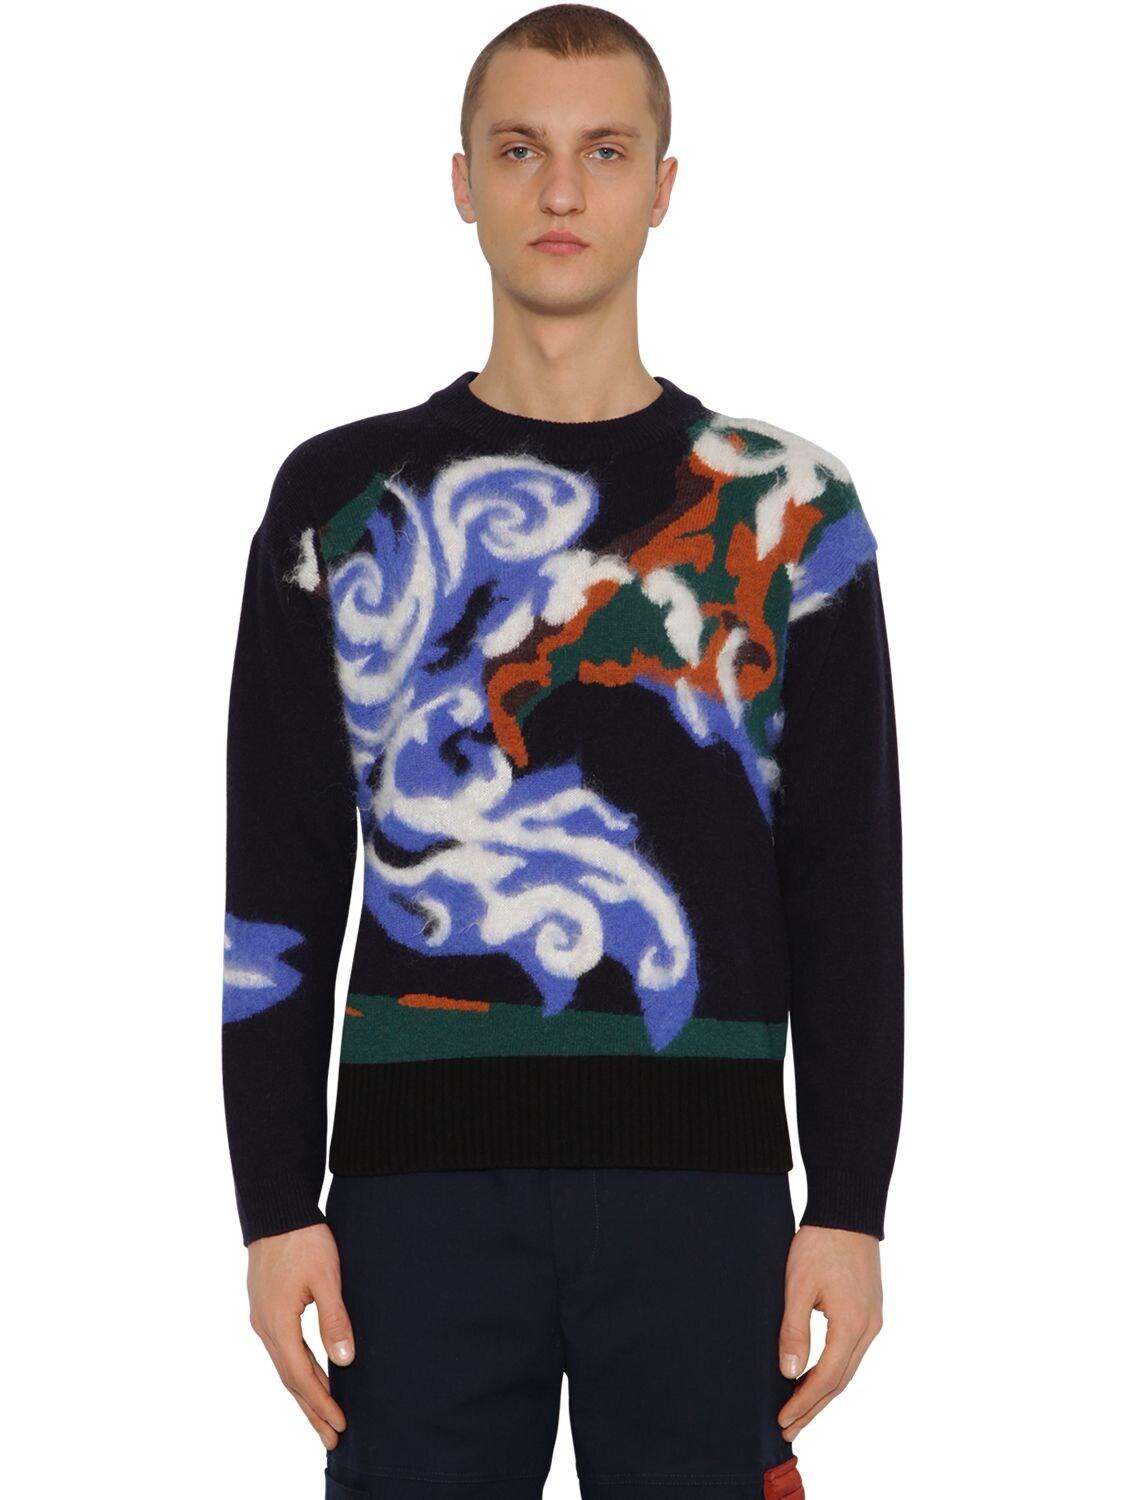 KENZO Wool ' World' Jumper in Navy Blue (Blue) for Men - Save 33% - Lyst